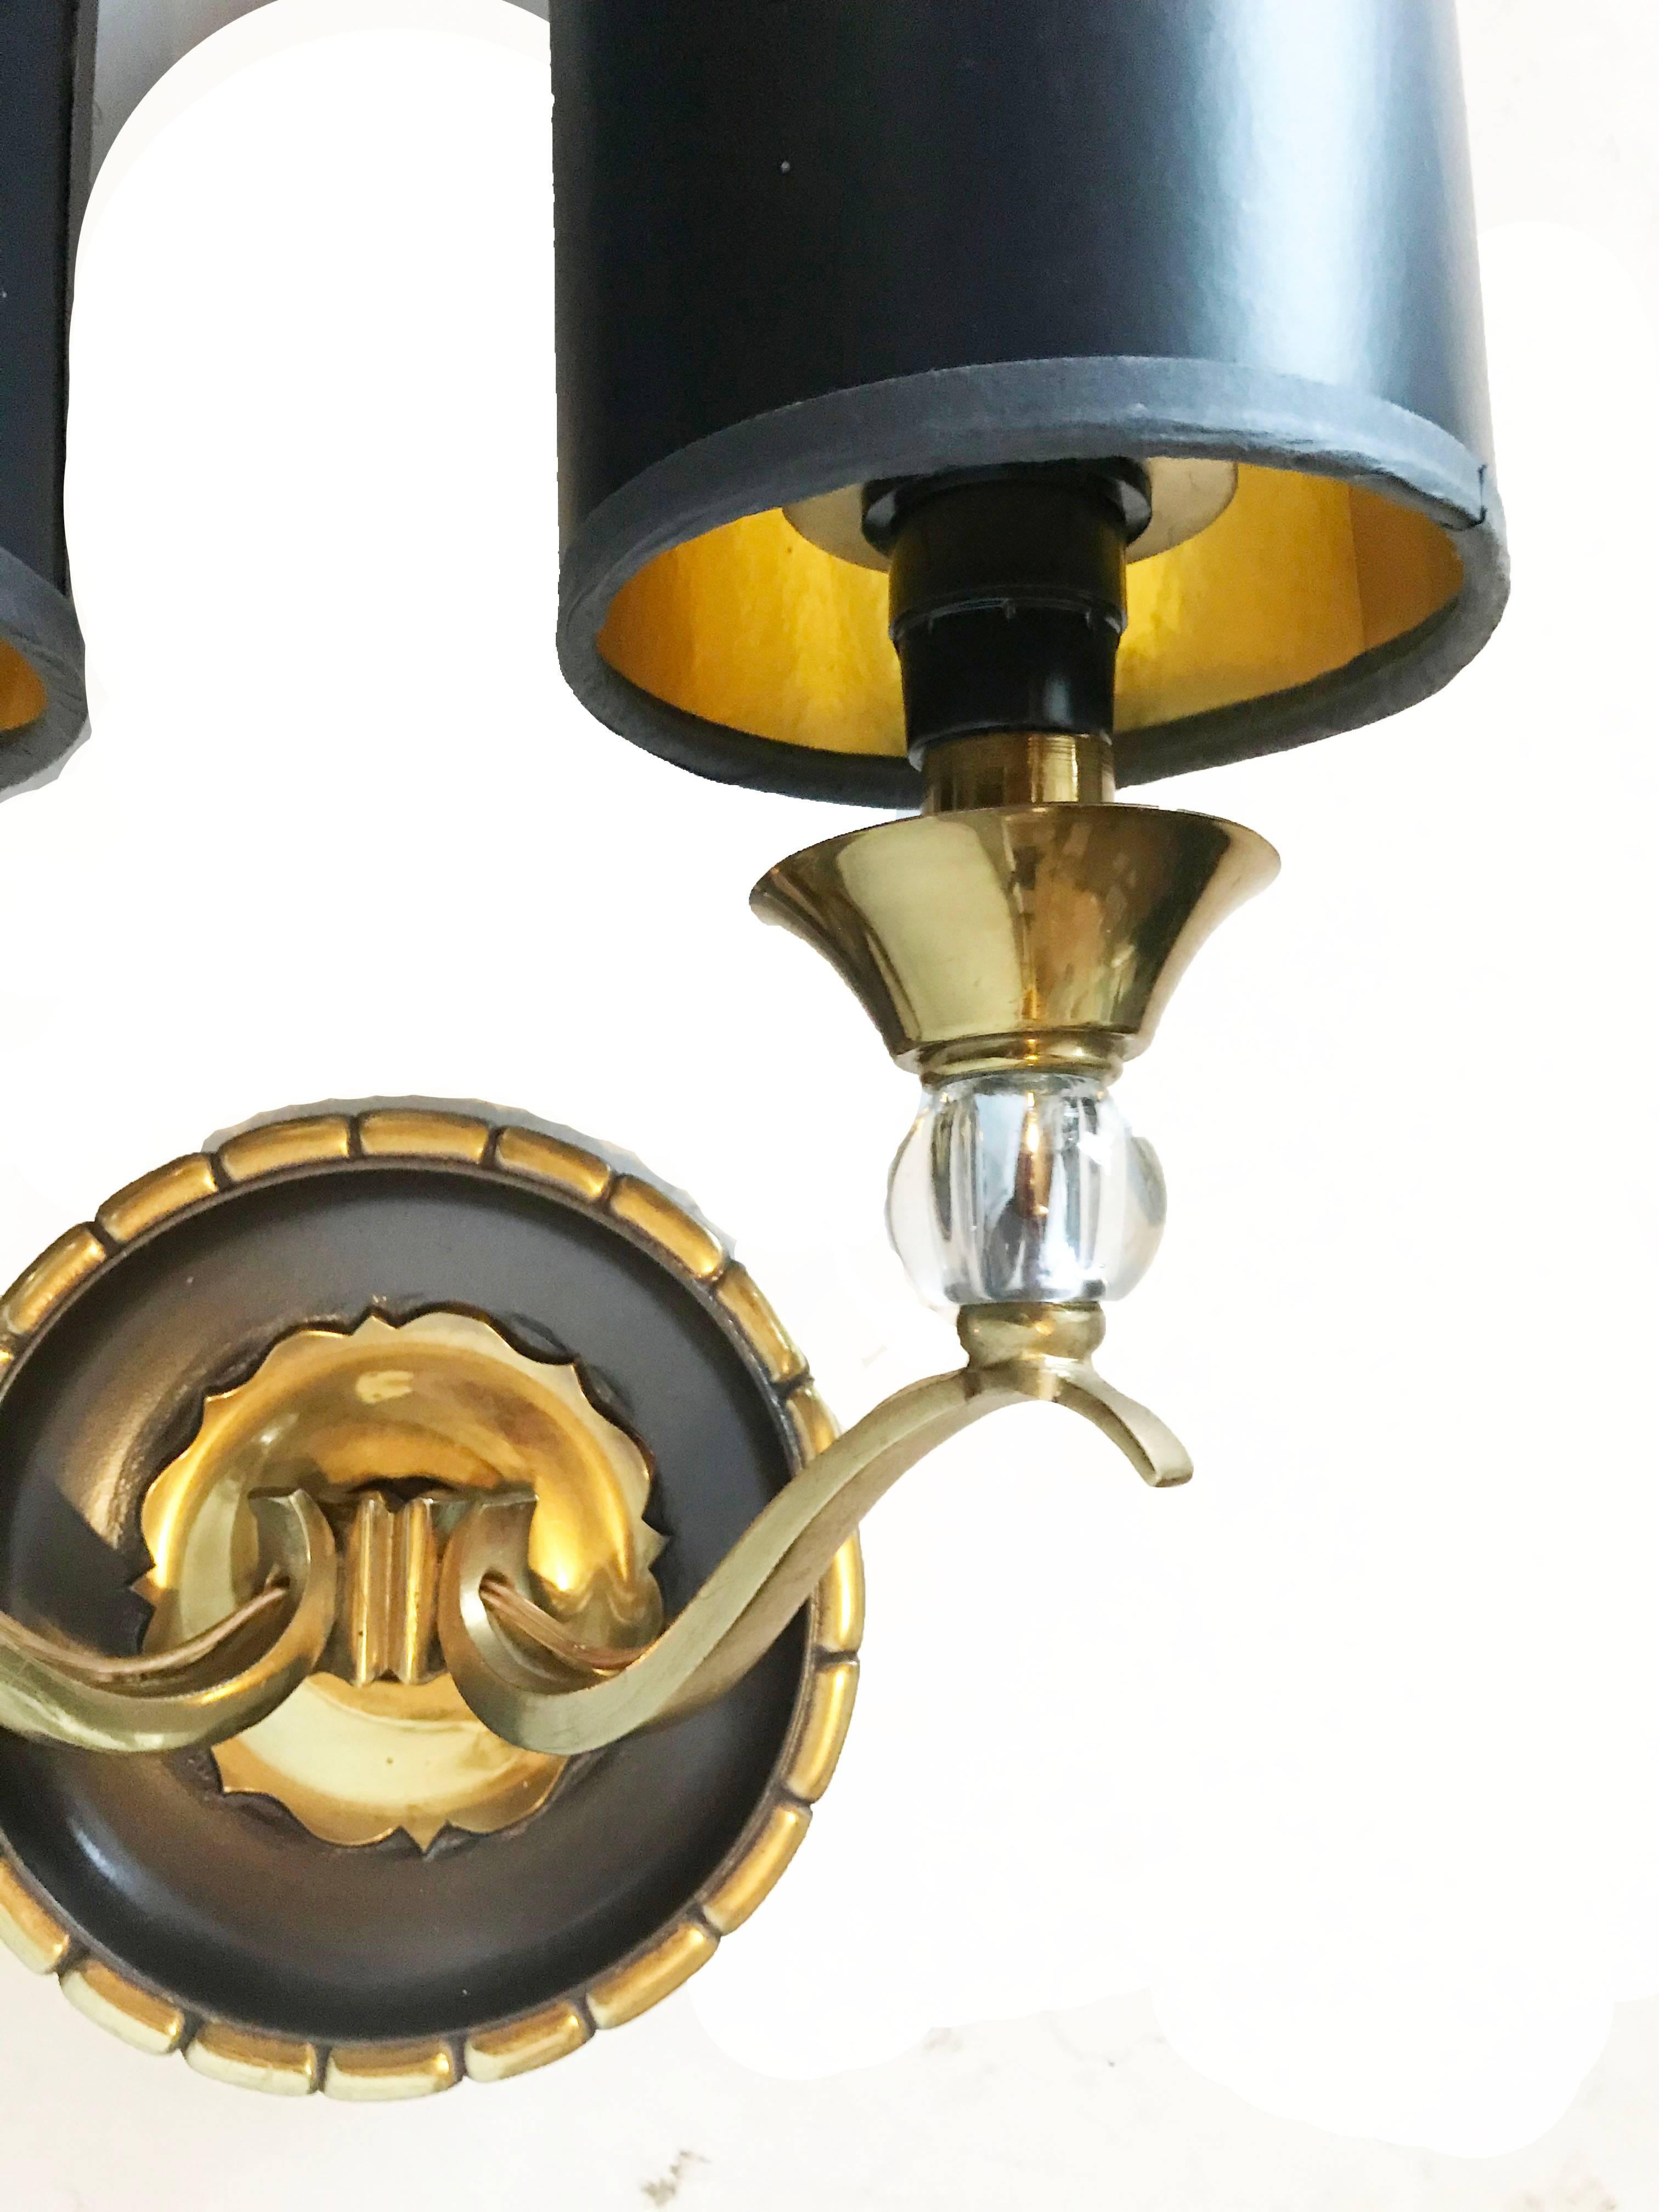 Superb pair of two-tone bronze sconces by Royal Lumière.
Two lights, 40 watts max bulb.
Measures: Back plates: 5.25 inches diameter.
New Black & Gold paper shades: 8 inches height, 4 inches diameter.